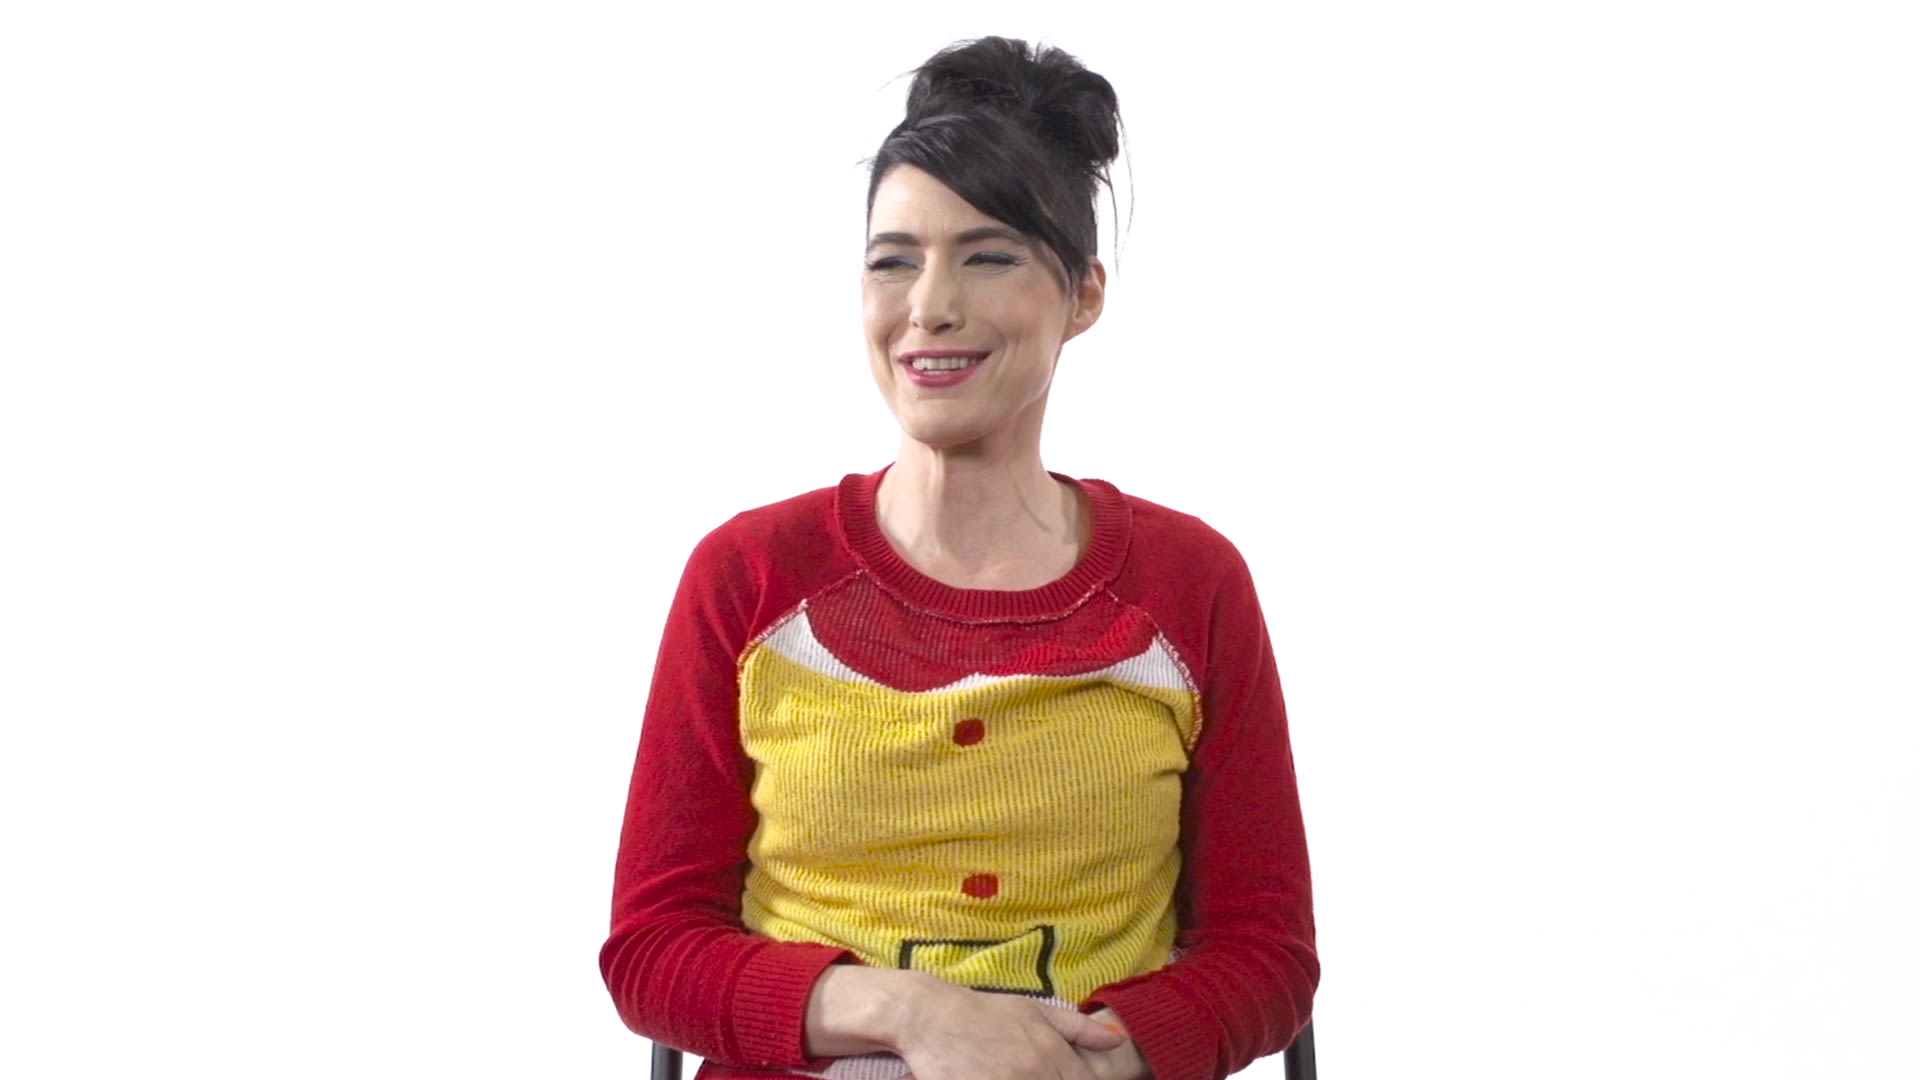 Watch Kathleen Hanna Rates Tampons, The Bible and LinkedIn Over/Under Over/Under Pitchfork